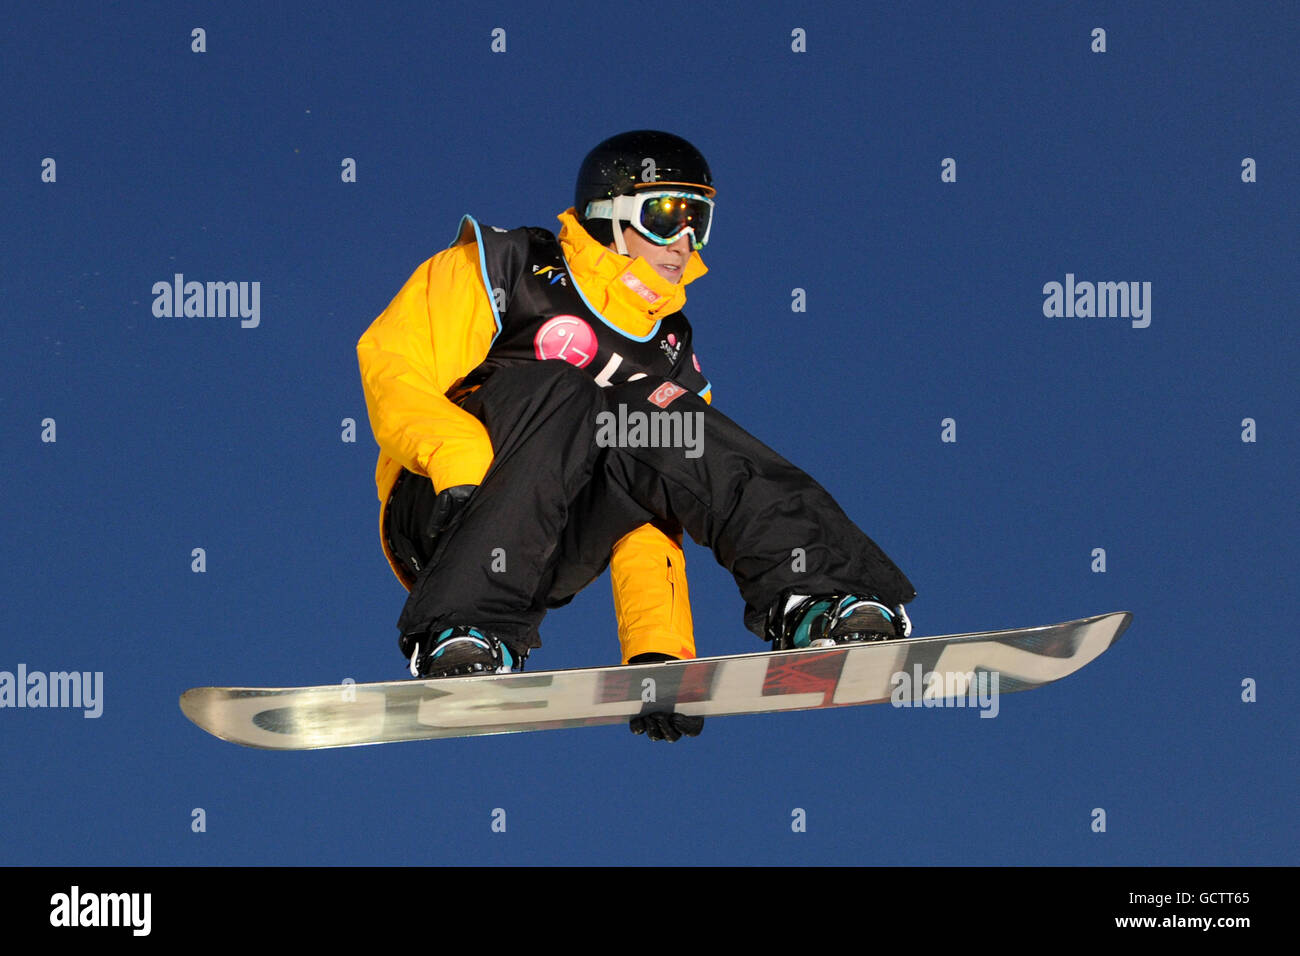 Michael Macho of Austria during the LG Snowboard FIS World Cup in London Stock Photo